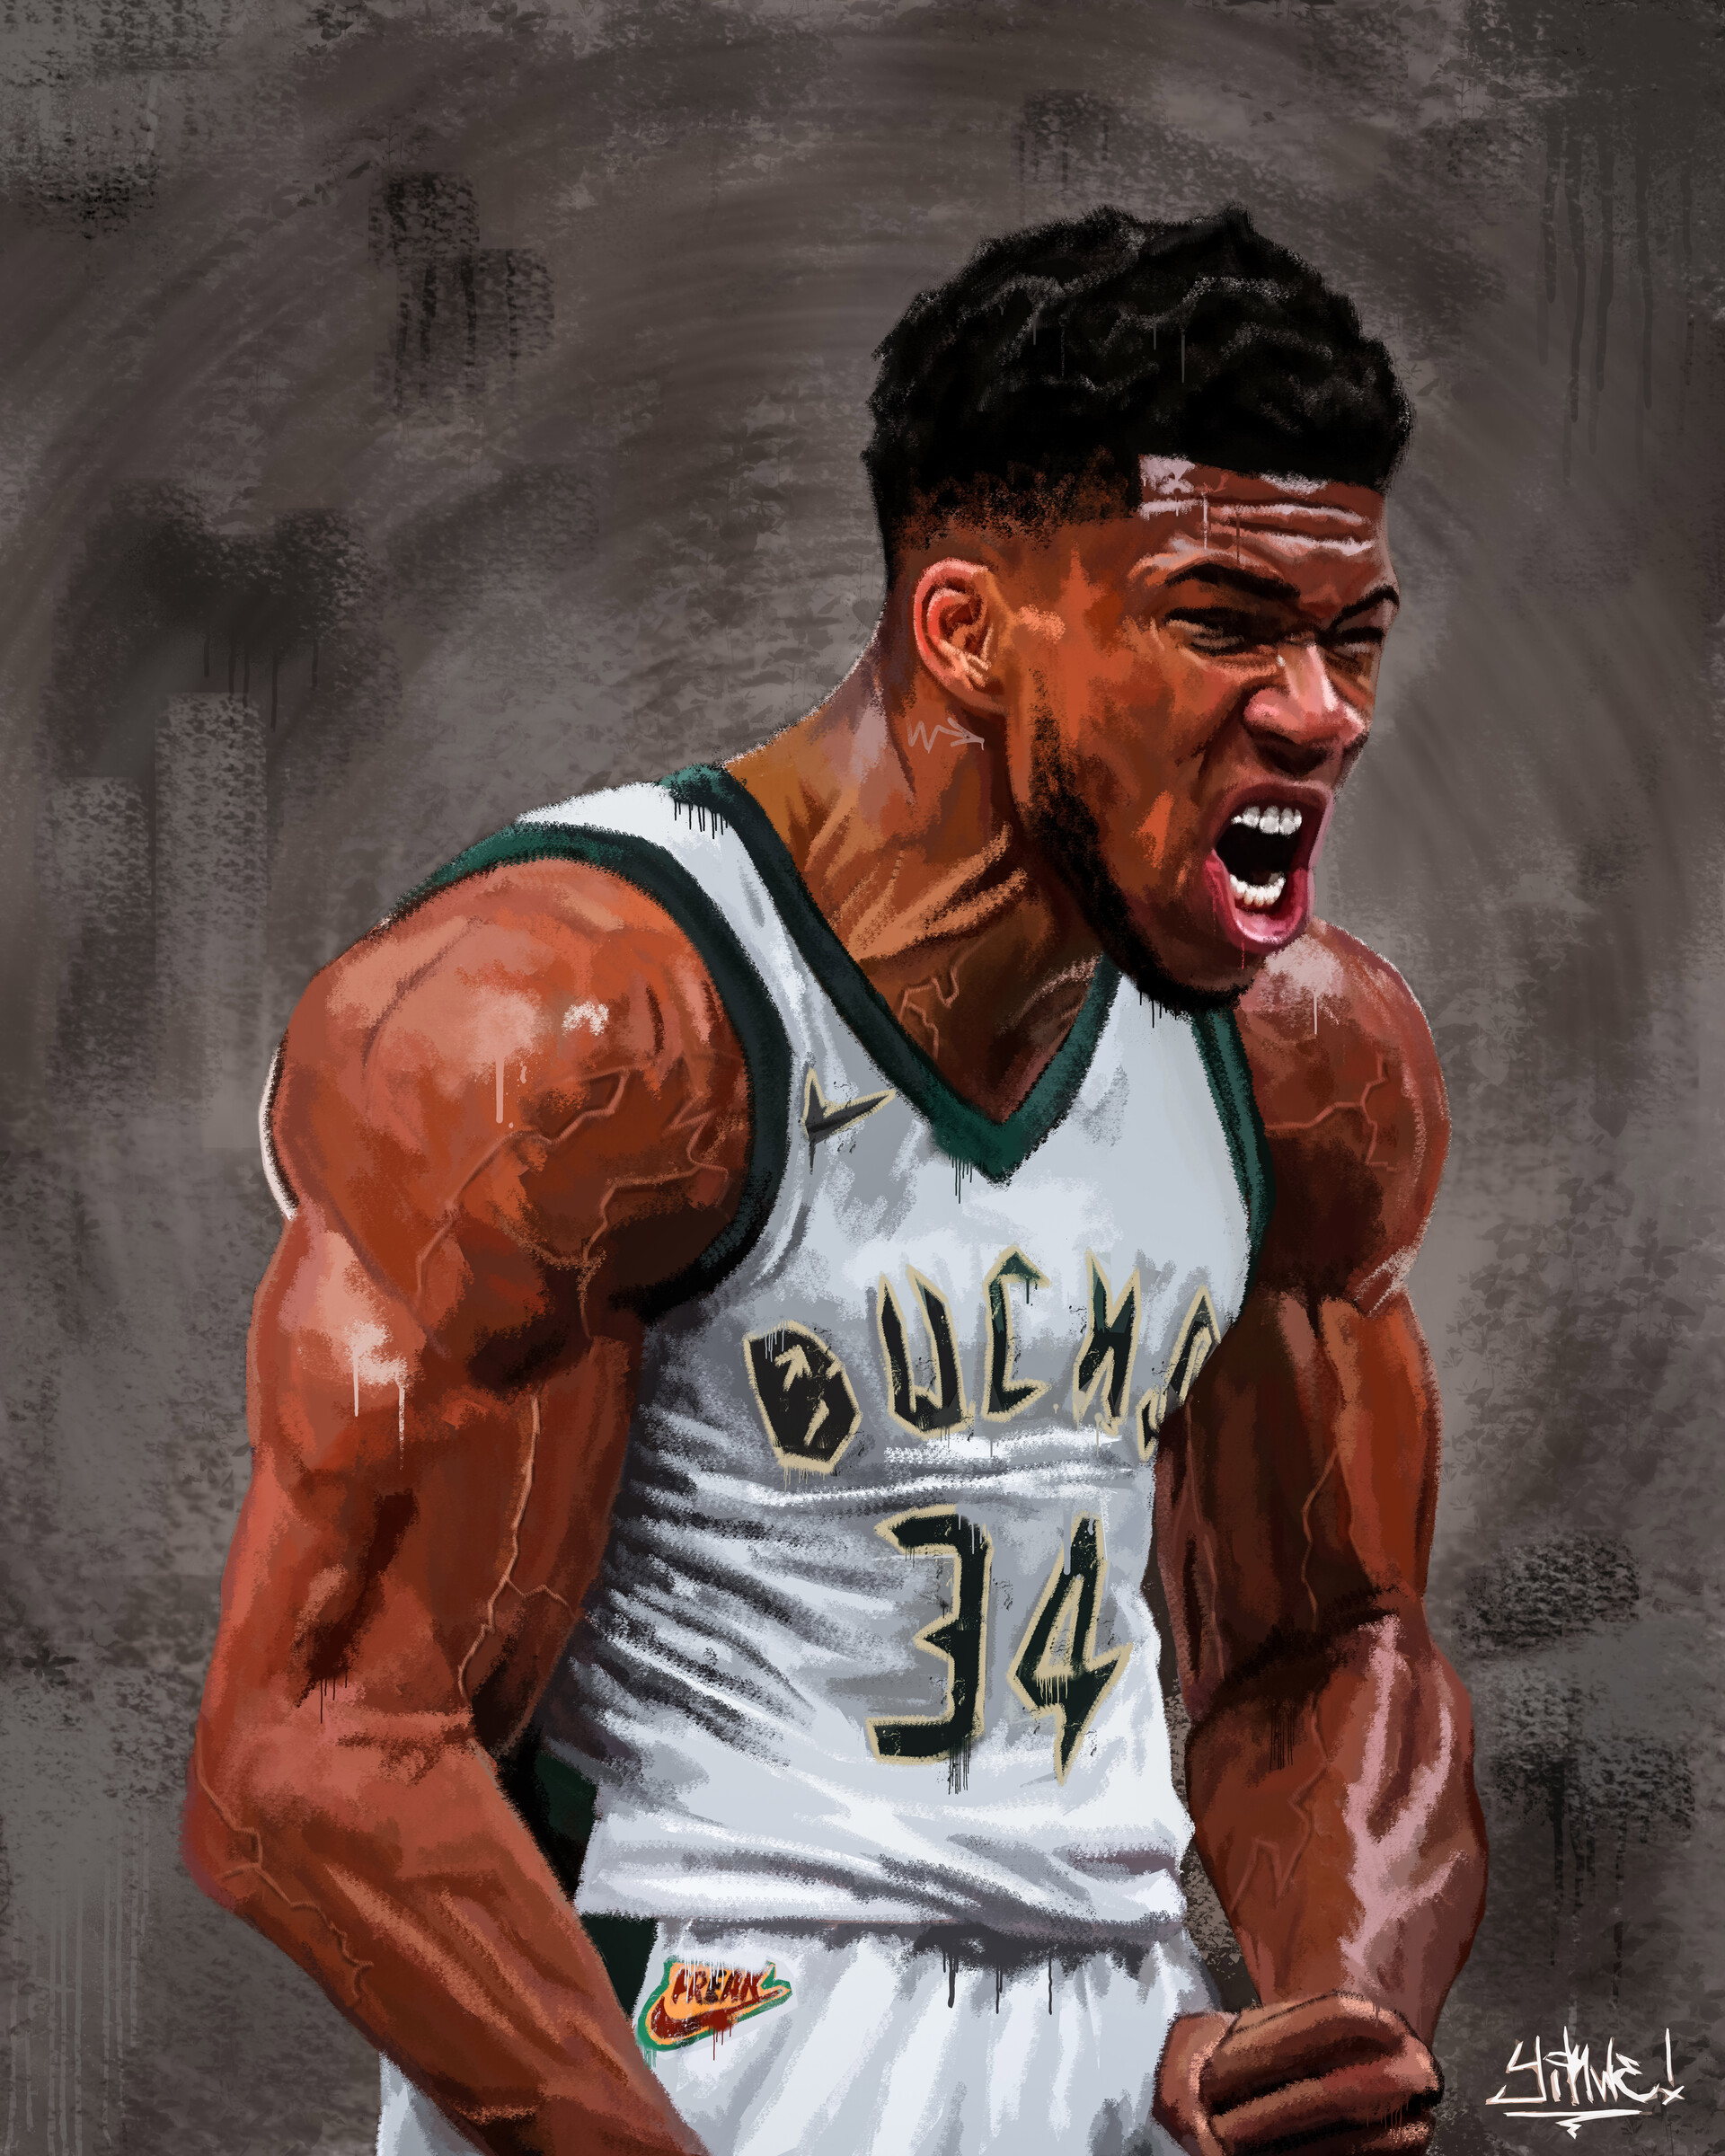 Basketball Player Giannis Antetokounmpo Poster 12x18inch unframed Canvas  Wall Art Decorative Painting Print Modern Home Bedroom Decor  Amazonin  Home  Kitchen